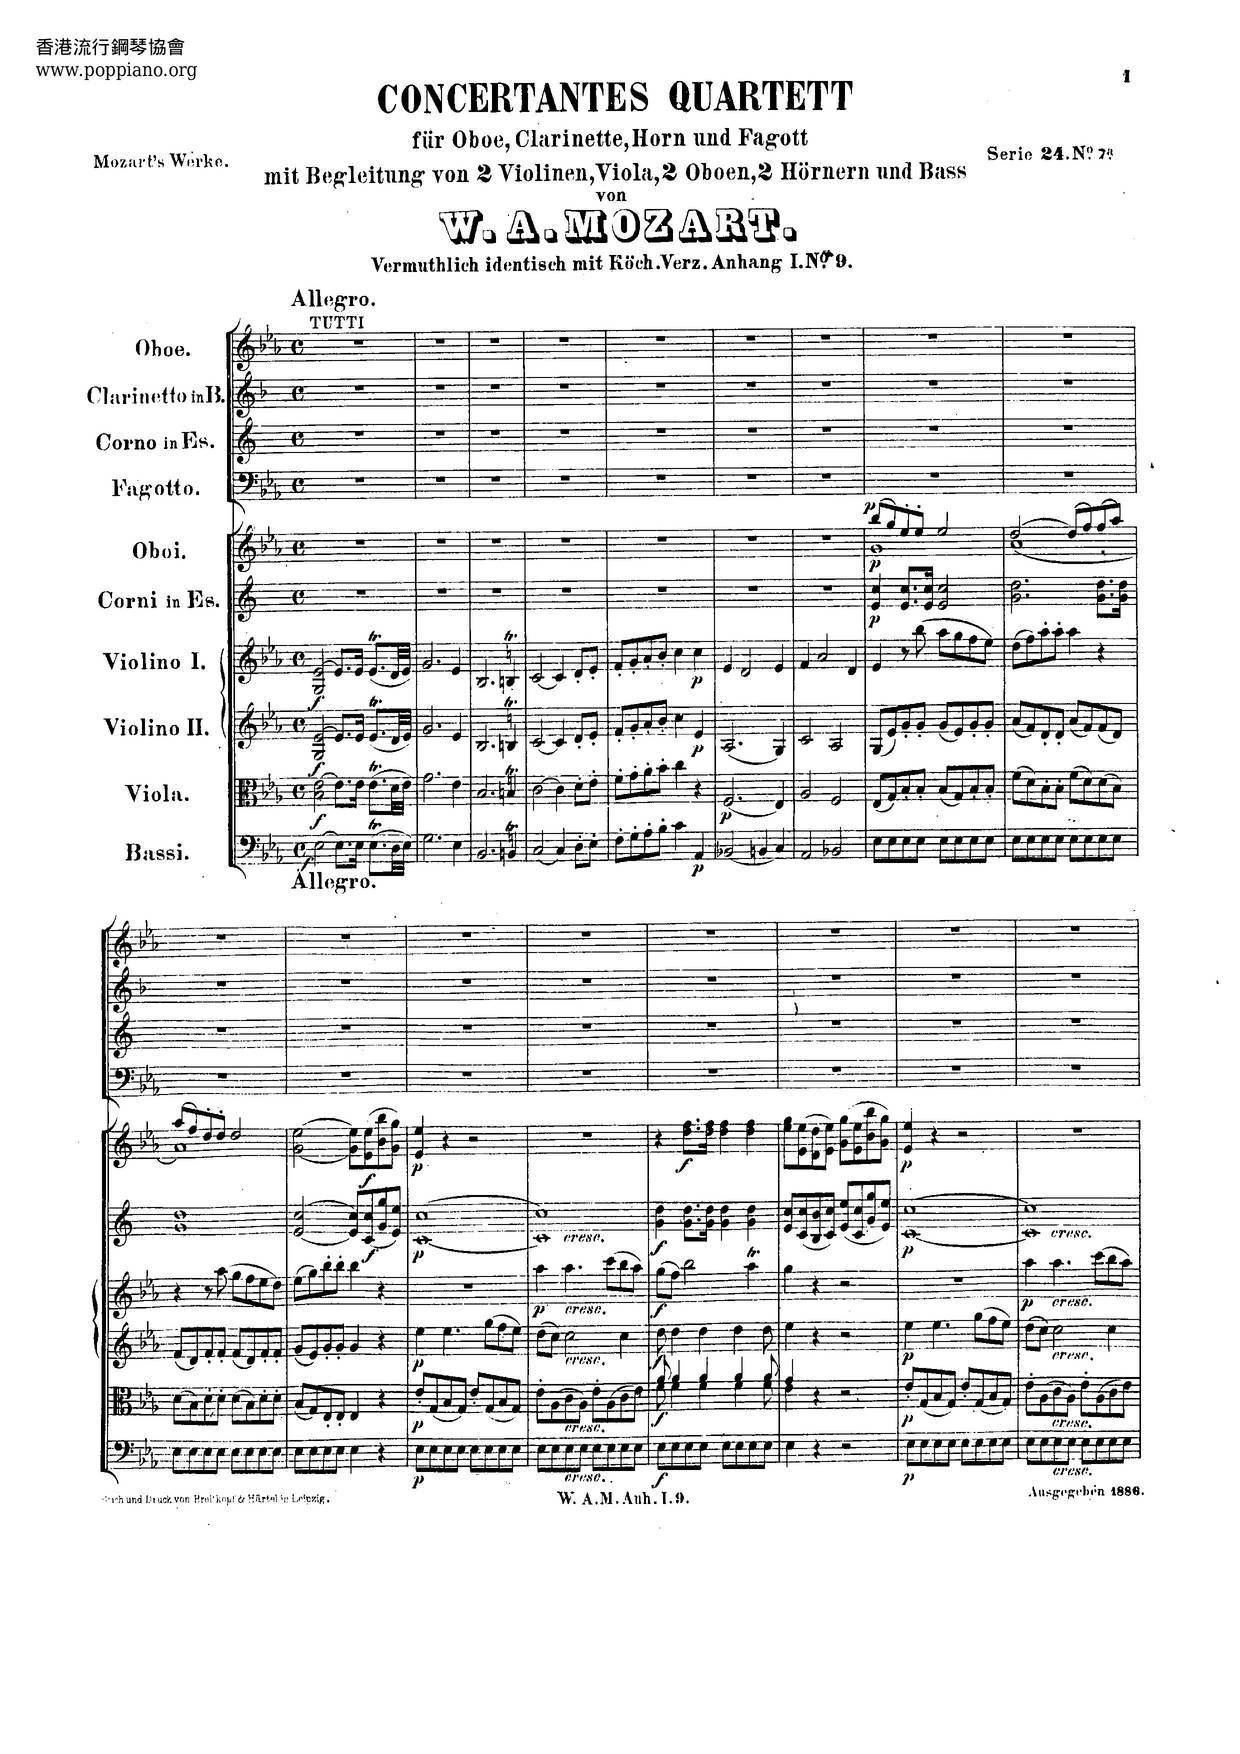 Sinfonia Concertante In E-Flat Major, K. 297B/Anh.c 14.01琴譜